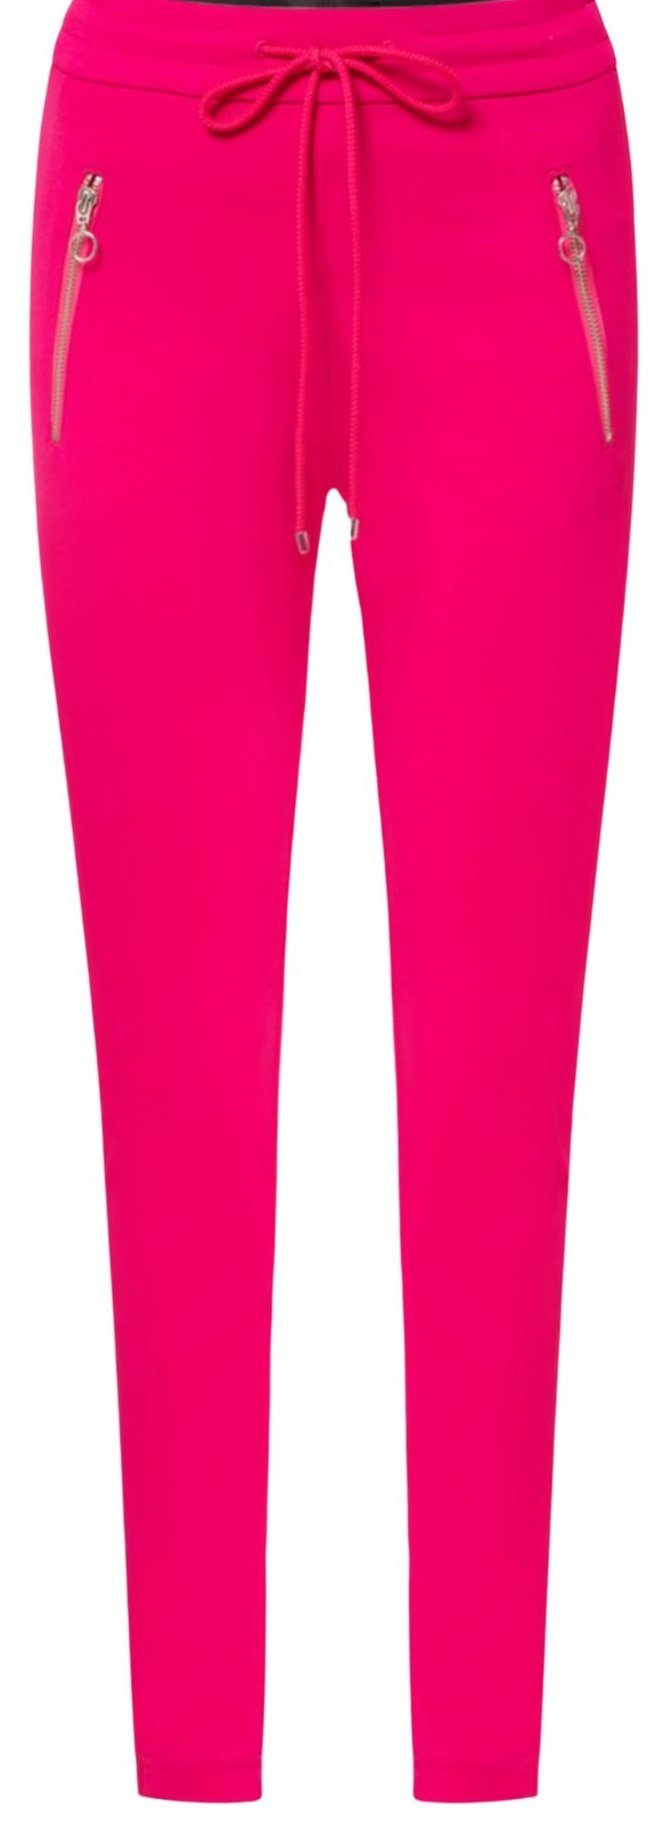 MAC Jogger Pants Easy Active virtual Fit mit pink aus Relaxed Techno leichtem Stretch Tunnelzug